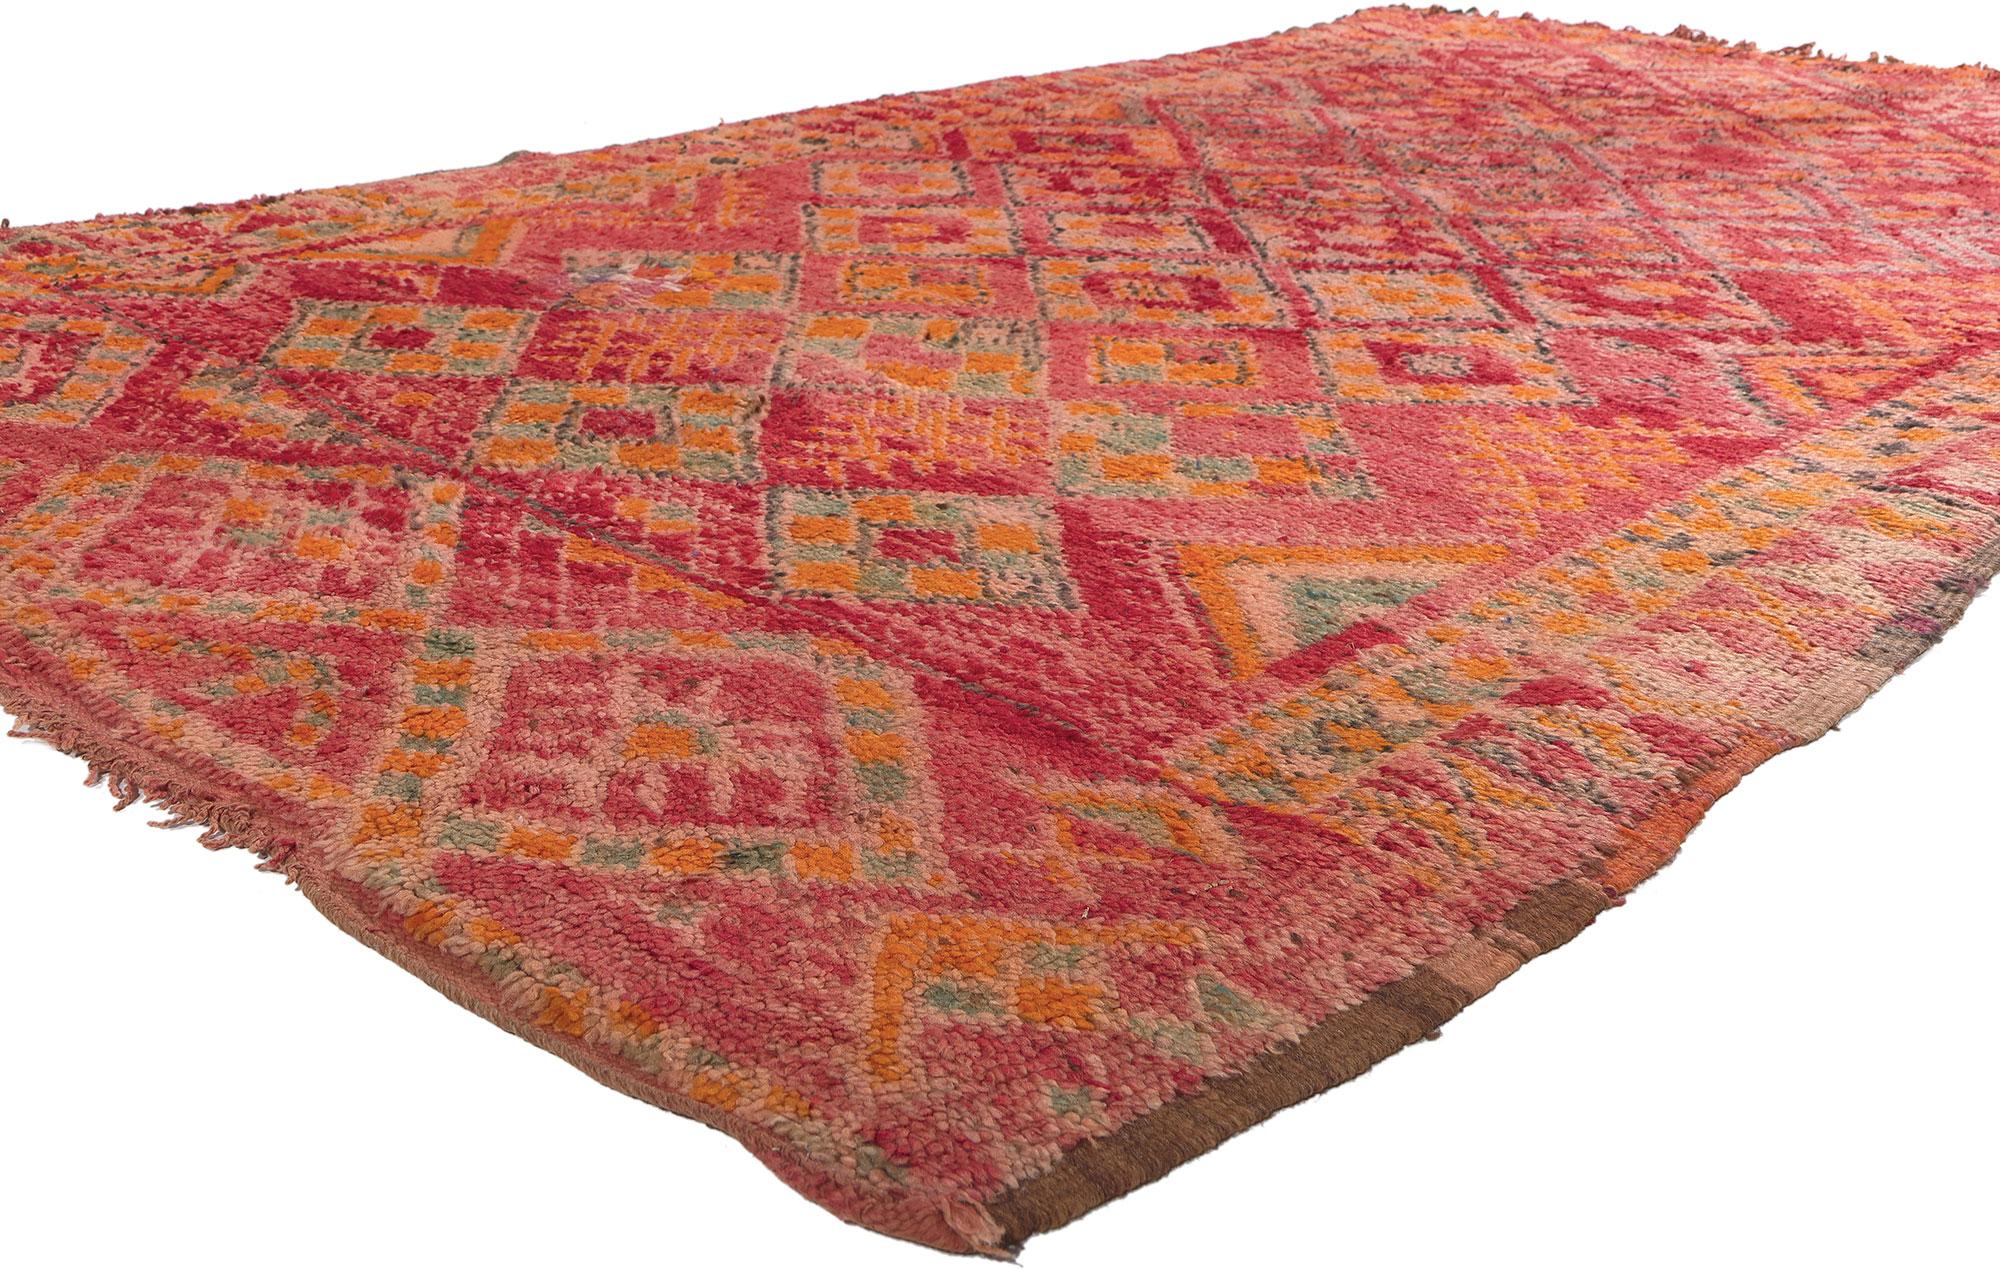 20677 Vintage Red Talsint Moroccan Rug, 05'09 x 09'07. Immerse yourself in the exquisite artistry of this hand-knotted wool vintage Talsint Moroccan rug, originating from the Figuig region in northeast Morocco, also known as Aït Bou Ichaouen.